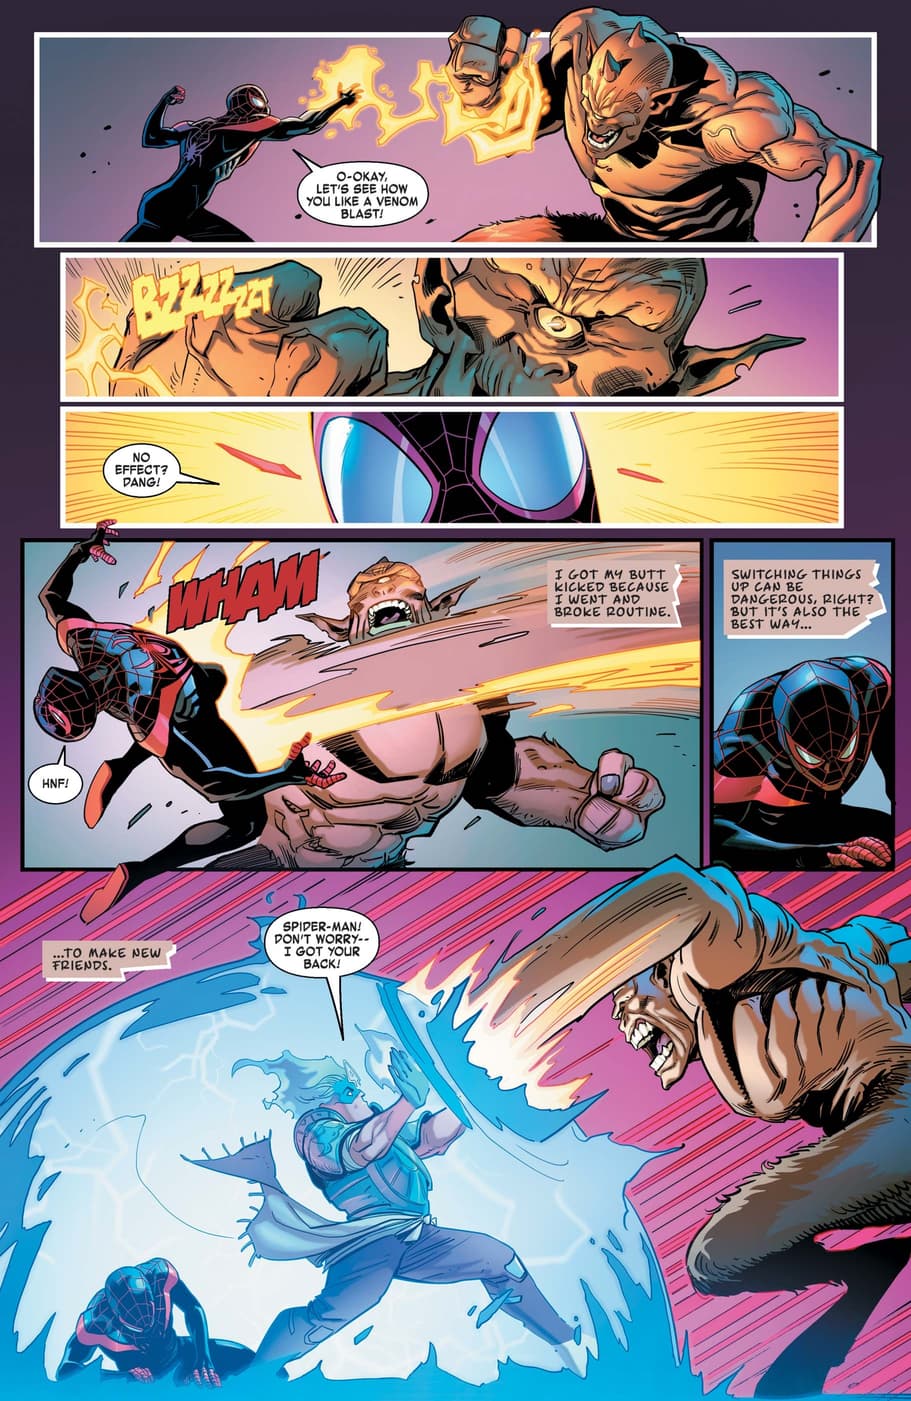 Miles and Amulet team up against a monster in MILES MORALES: SPIDER-MAN ANNUAL (2021) #1.